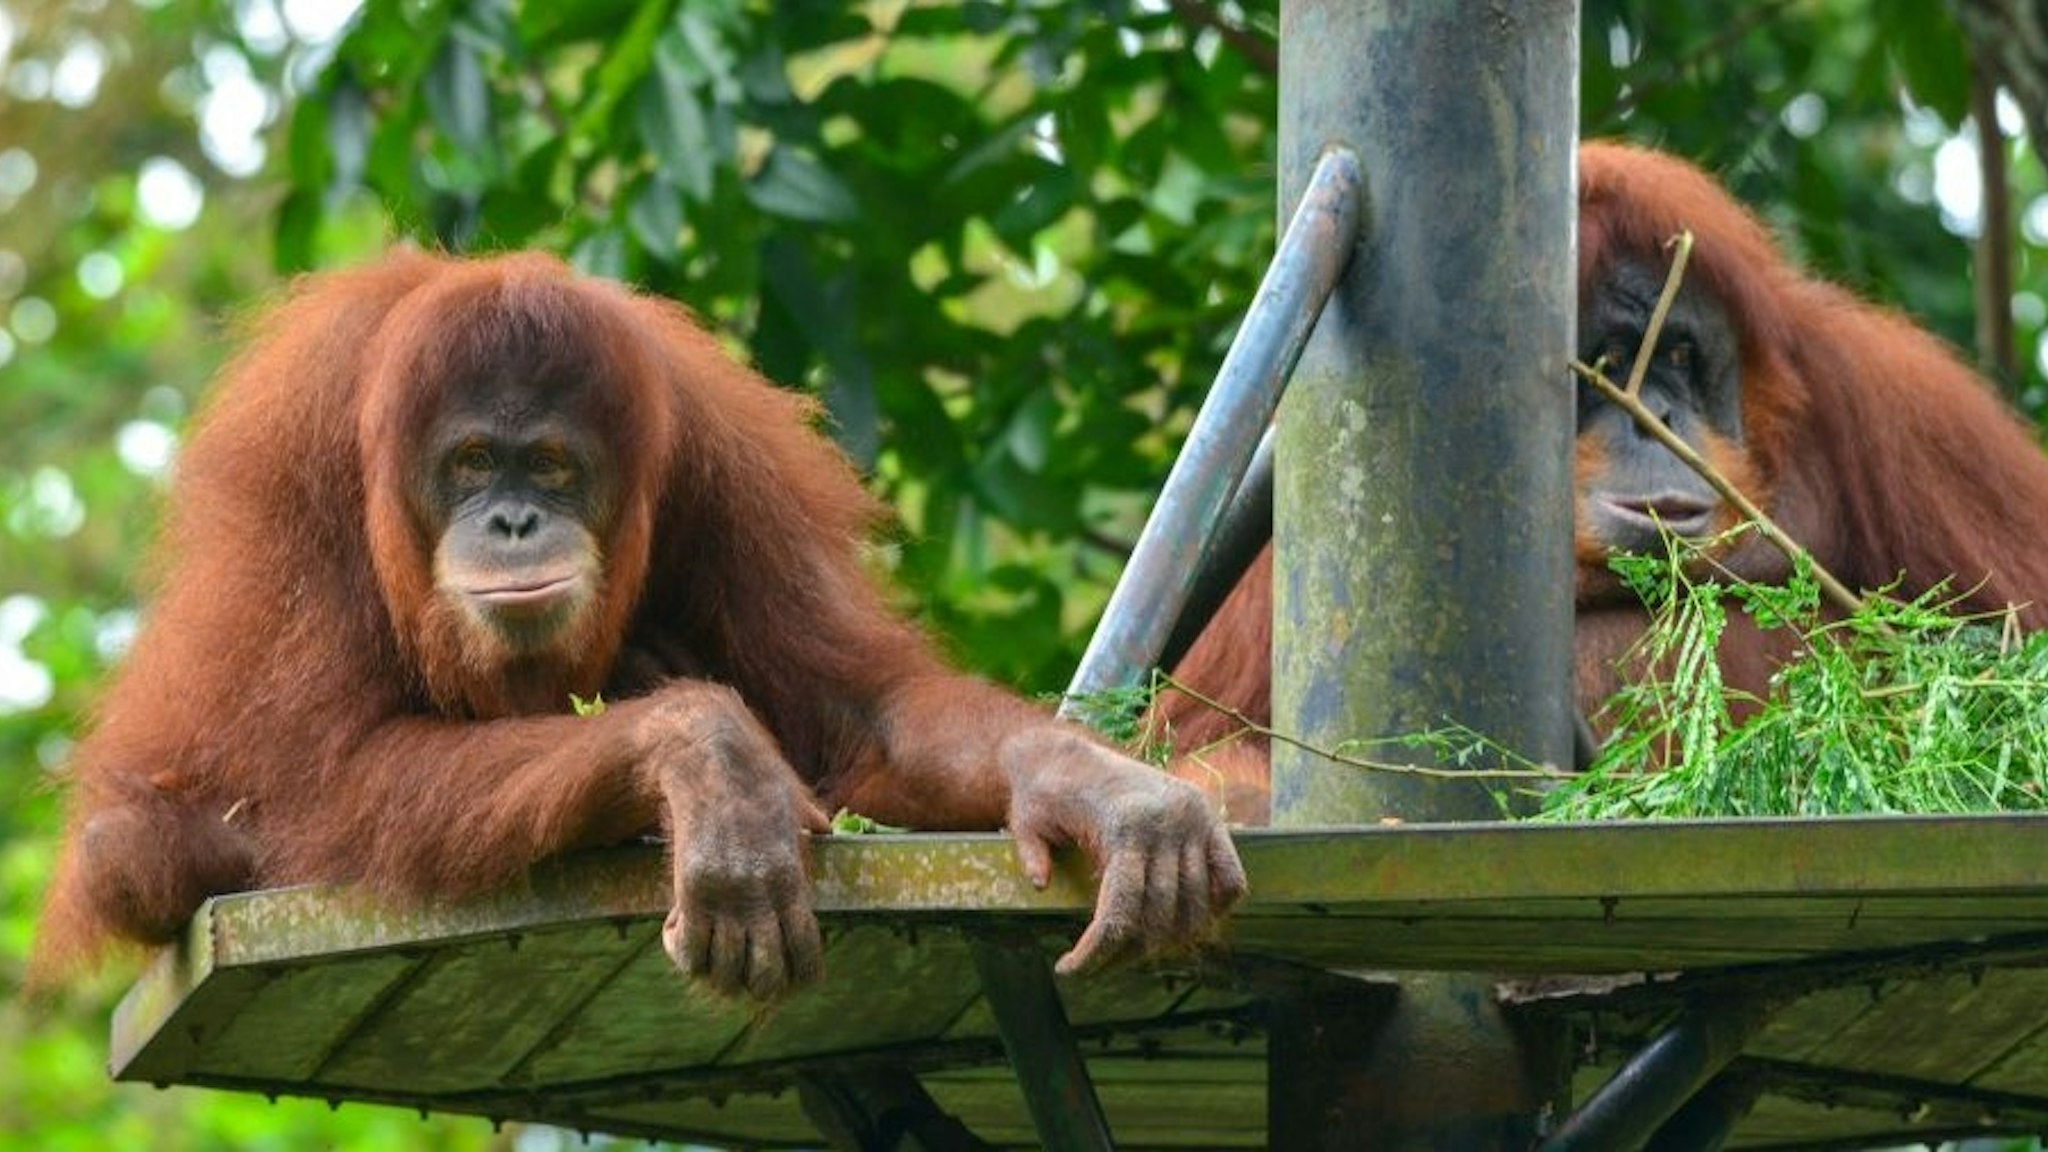 KUALA LUMPUR, Dec. 19, 2020 -- Sumatran orangutans are seen at Zoo Negara near Kuala Lumpur, Malaysia, Dec. 19, 2020. Zoo Negara reopened to the public on Dec. 18 after two months' closure forced by the conditional movement control order CMCO in the area. Based upon current assessments, the Zoo will remain open as scheduled with reduced capacity of 1,250 visitors. (Photo by